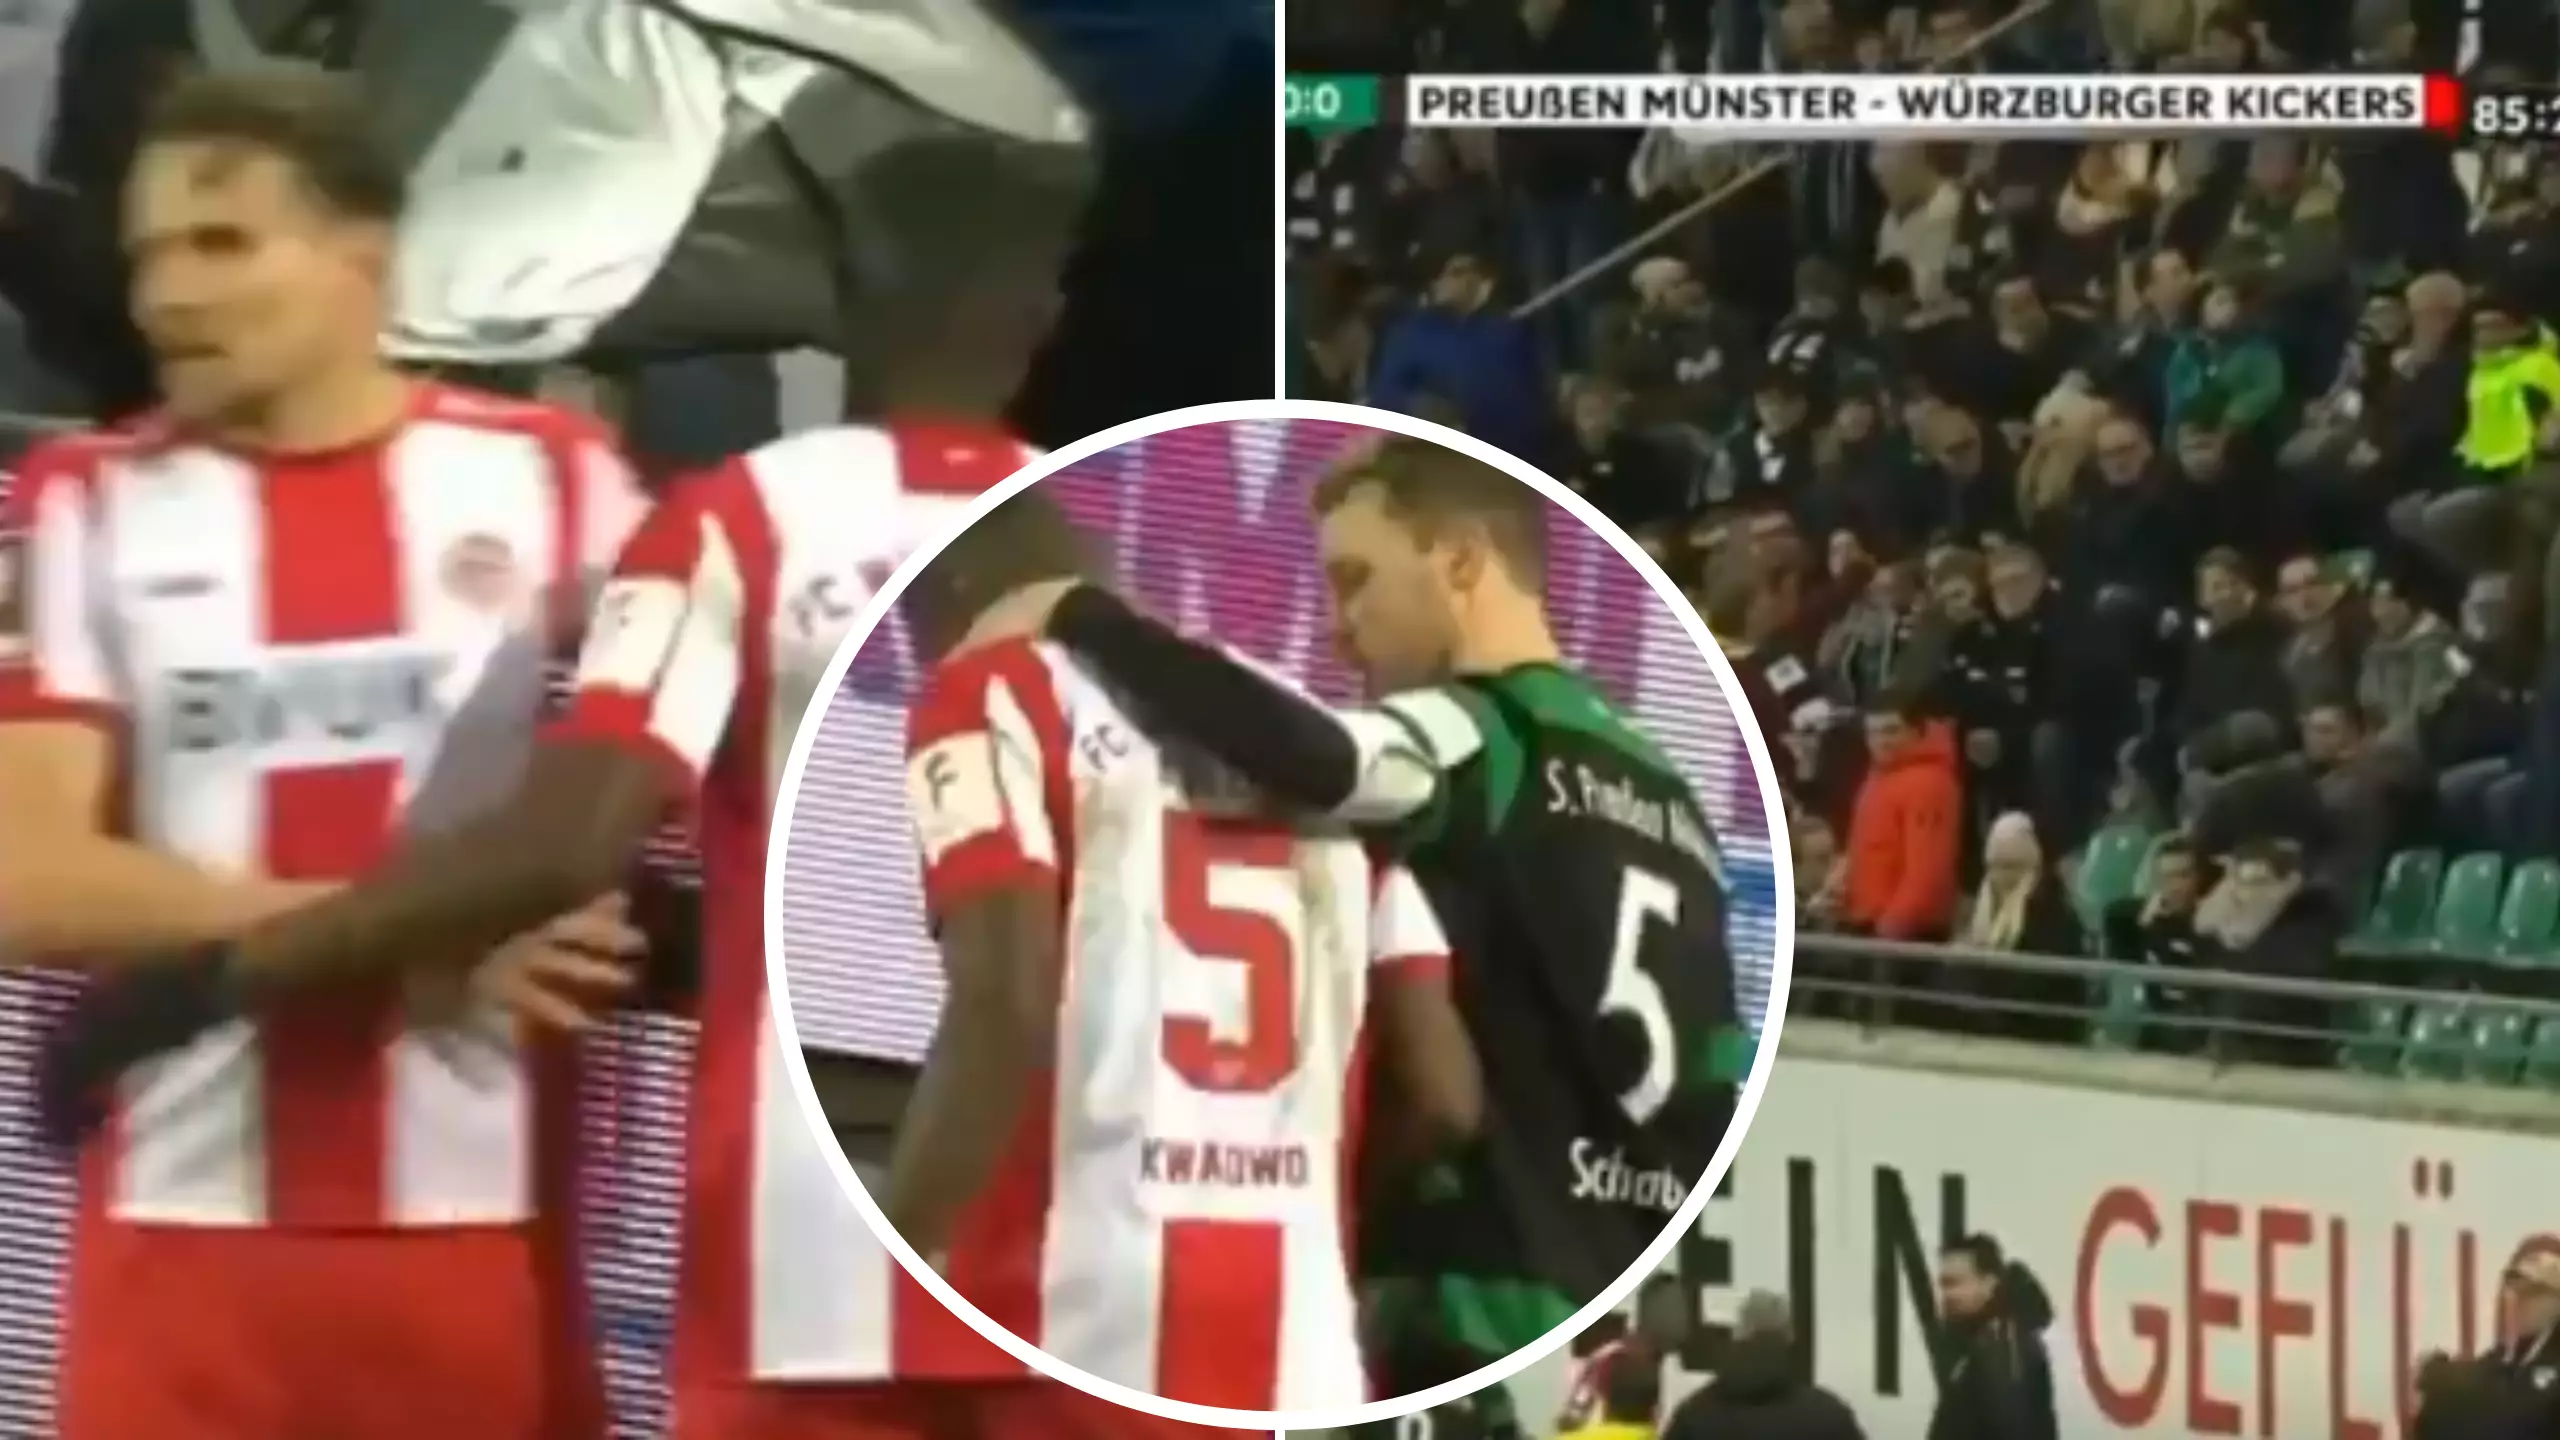 Entire Stadium Brilliantly Chant 'Nazis Out' After Player Receives Racist Abuse